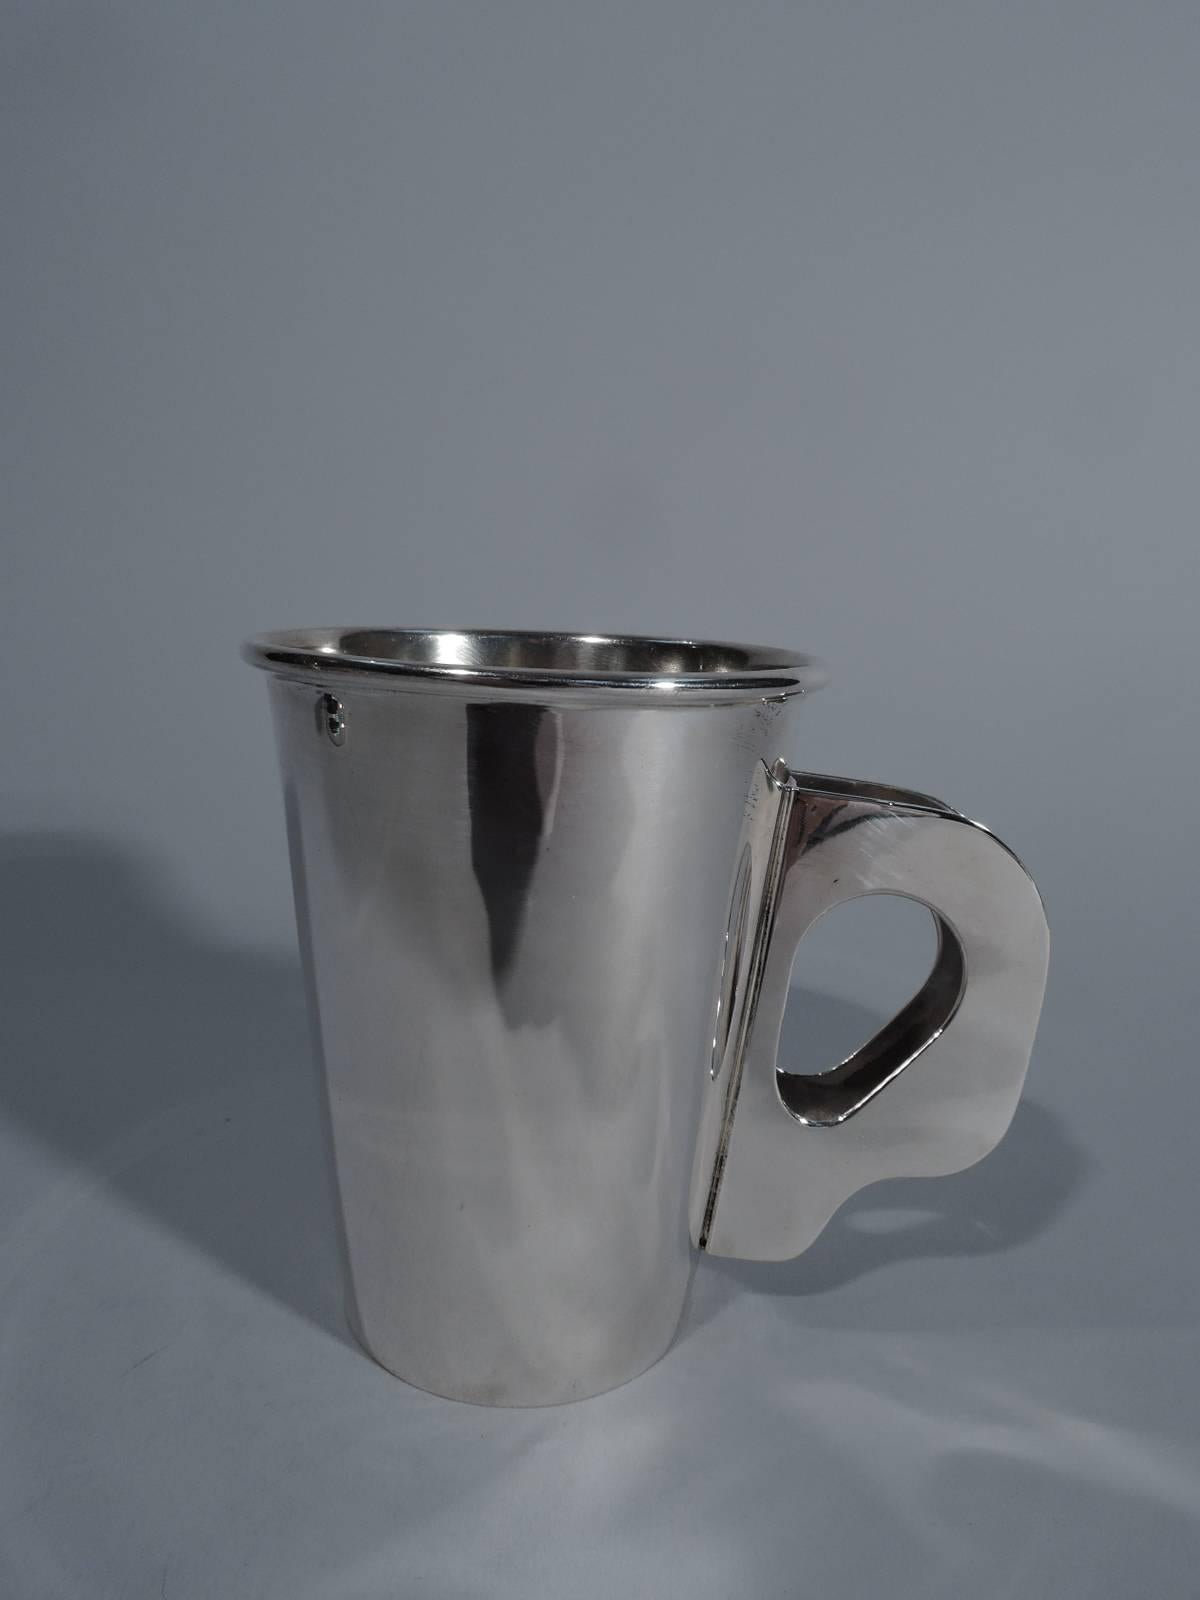 Sterling silver mug. Made by Bulgari in Italy. Straight and tapering sides, molded rim, and double handle with cut-out oval finger rest. Interior has light gilt wash. Perfect for morning coffee. Also makes a great baby cup for one super hip,